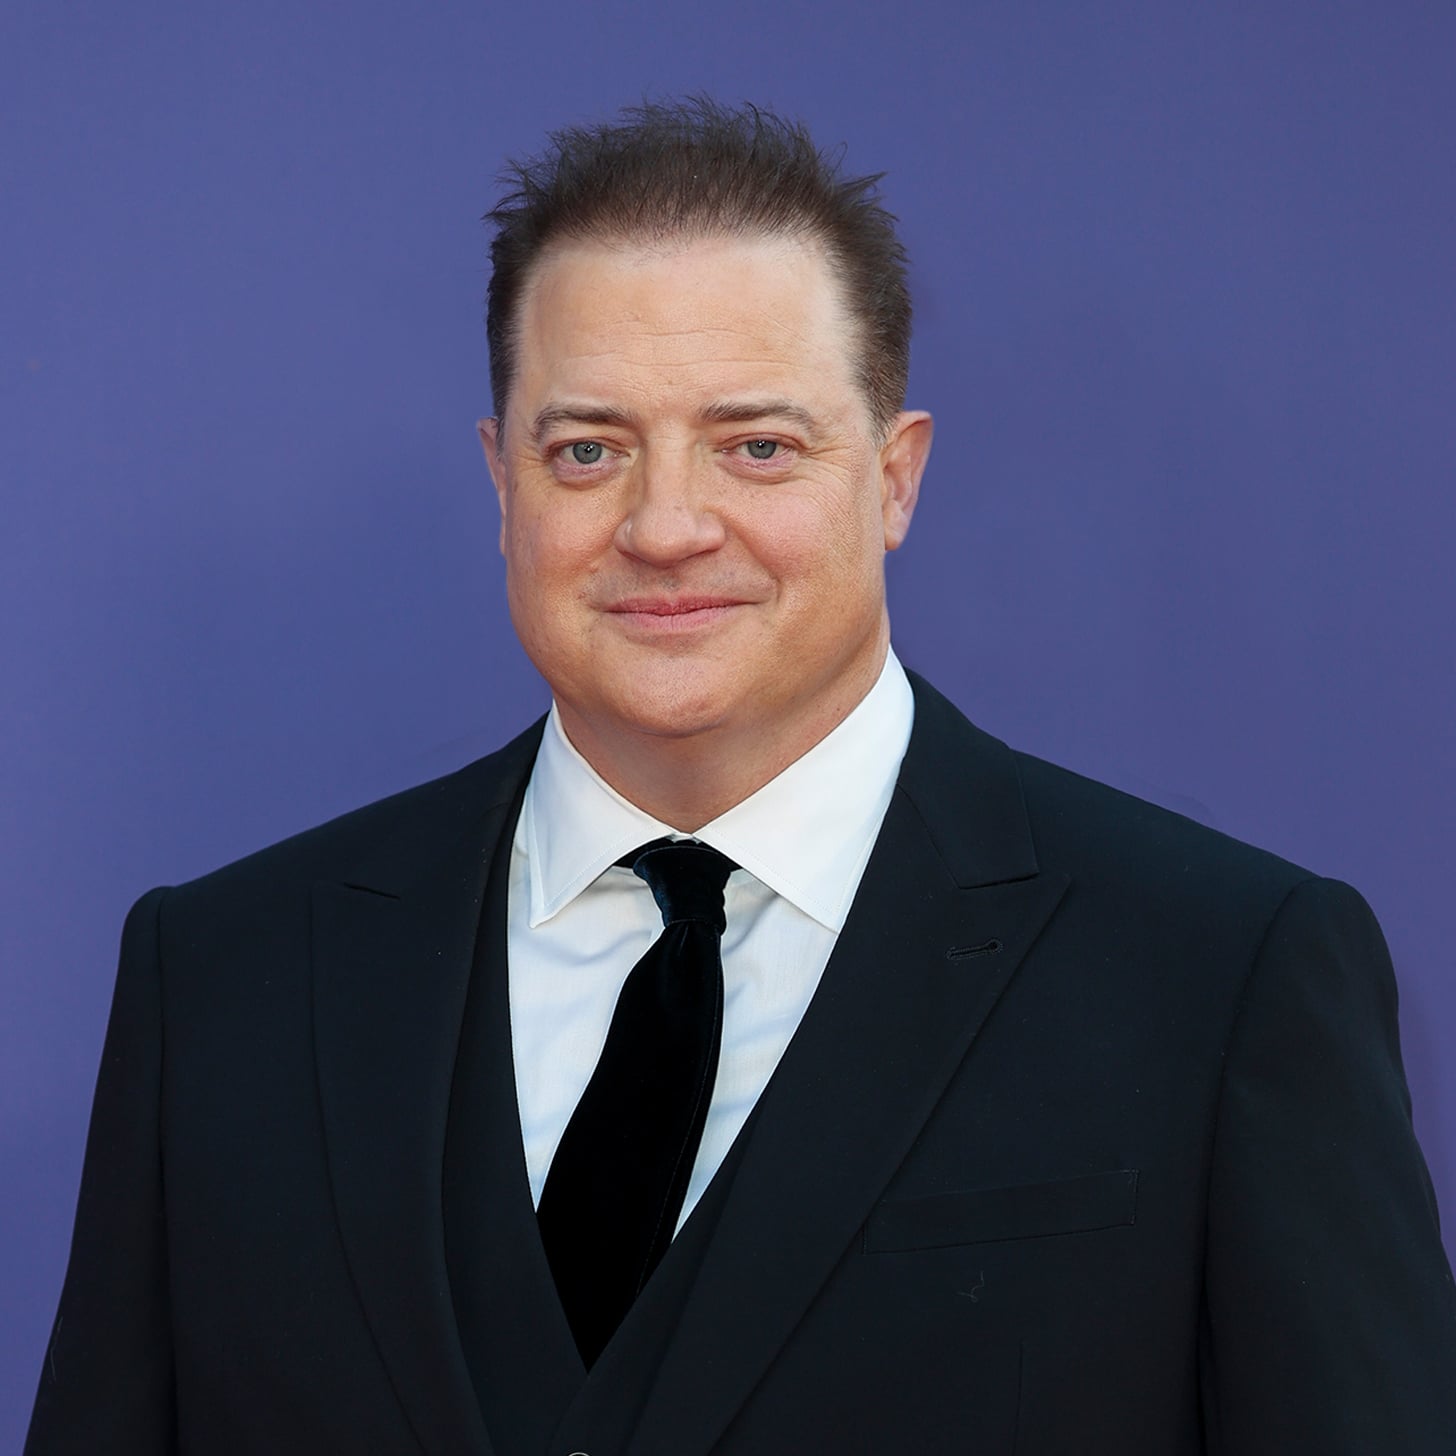 Brendan Fraser Won’t Attend the Golden Globes: “My Mother Didn’t Raise a Hypocrite”